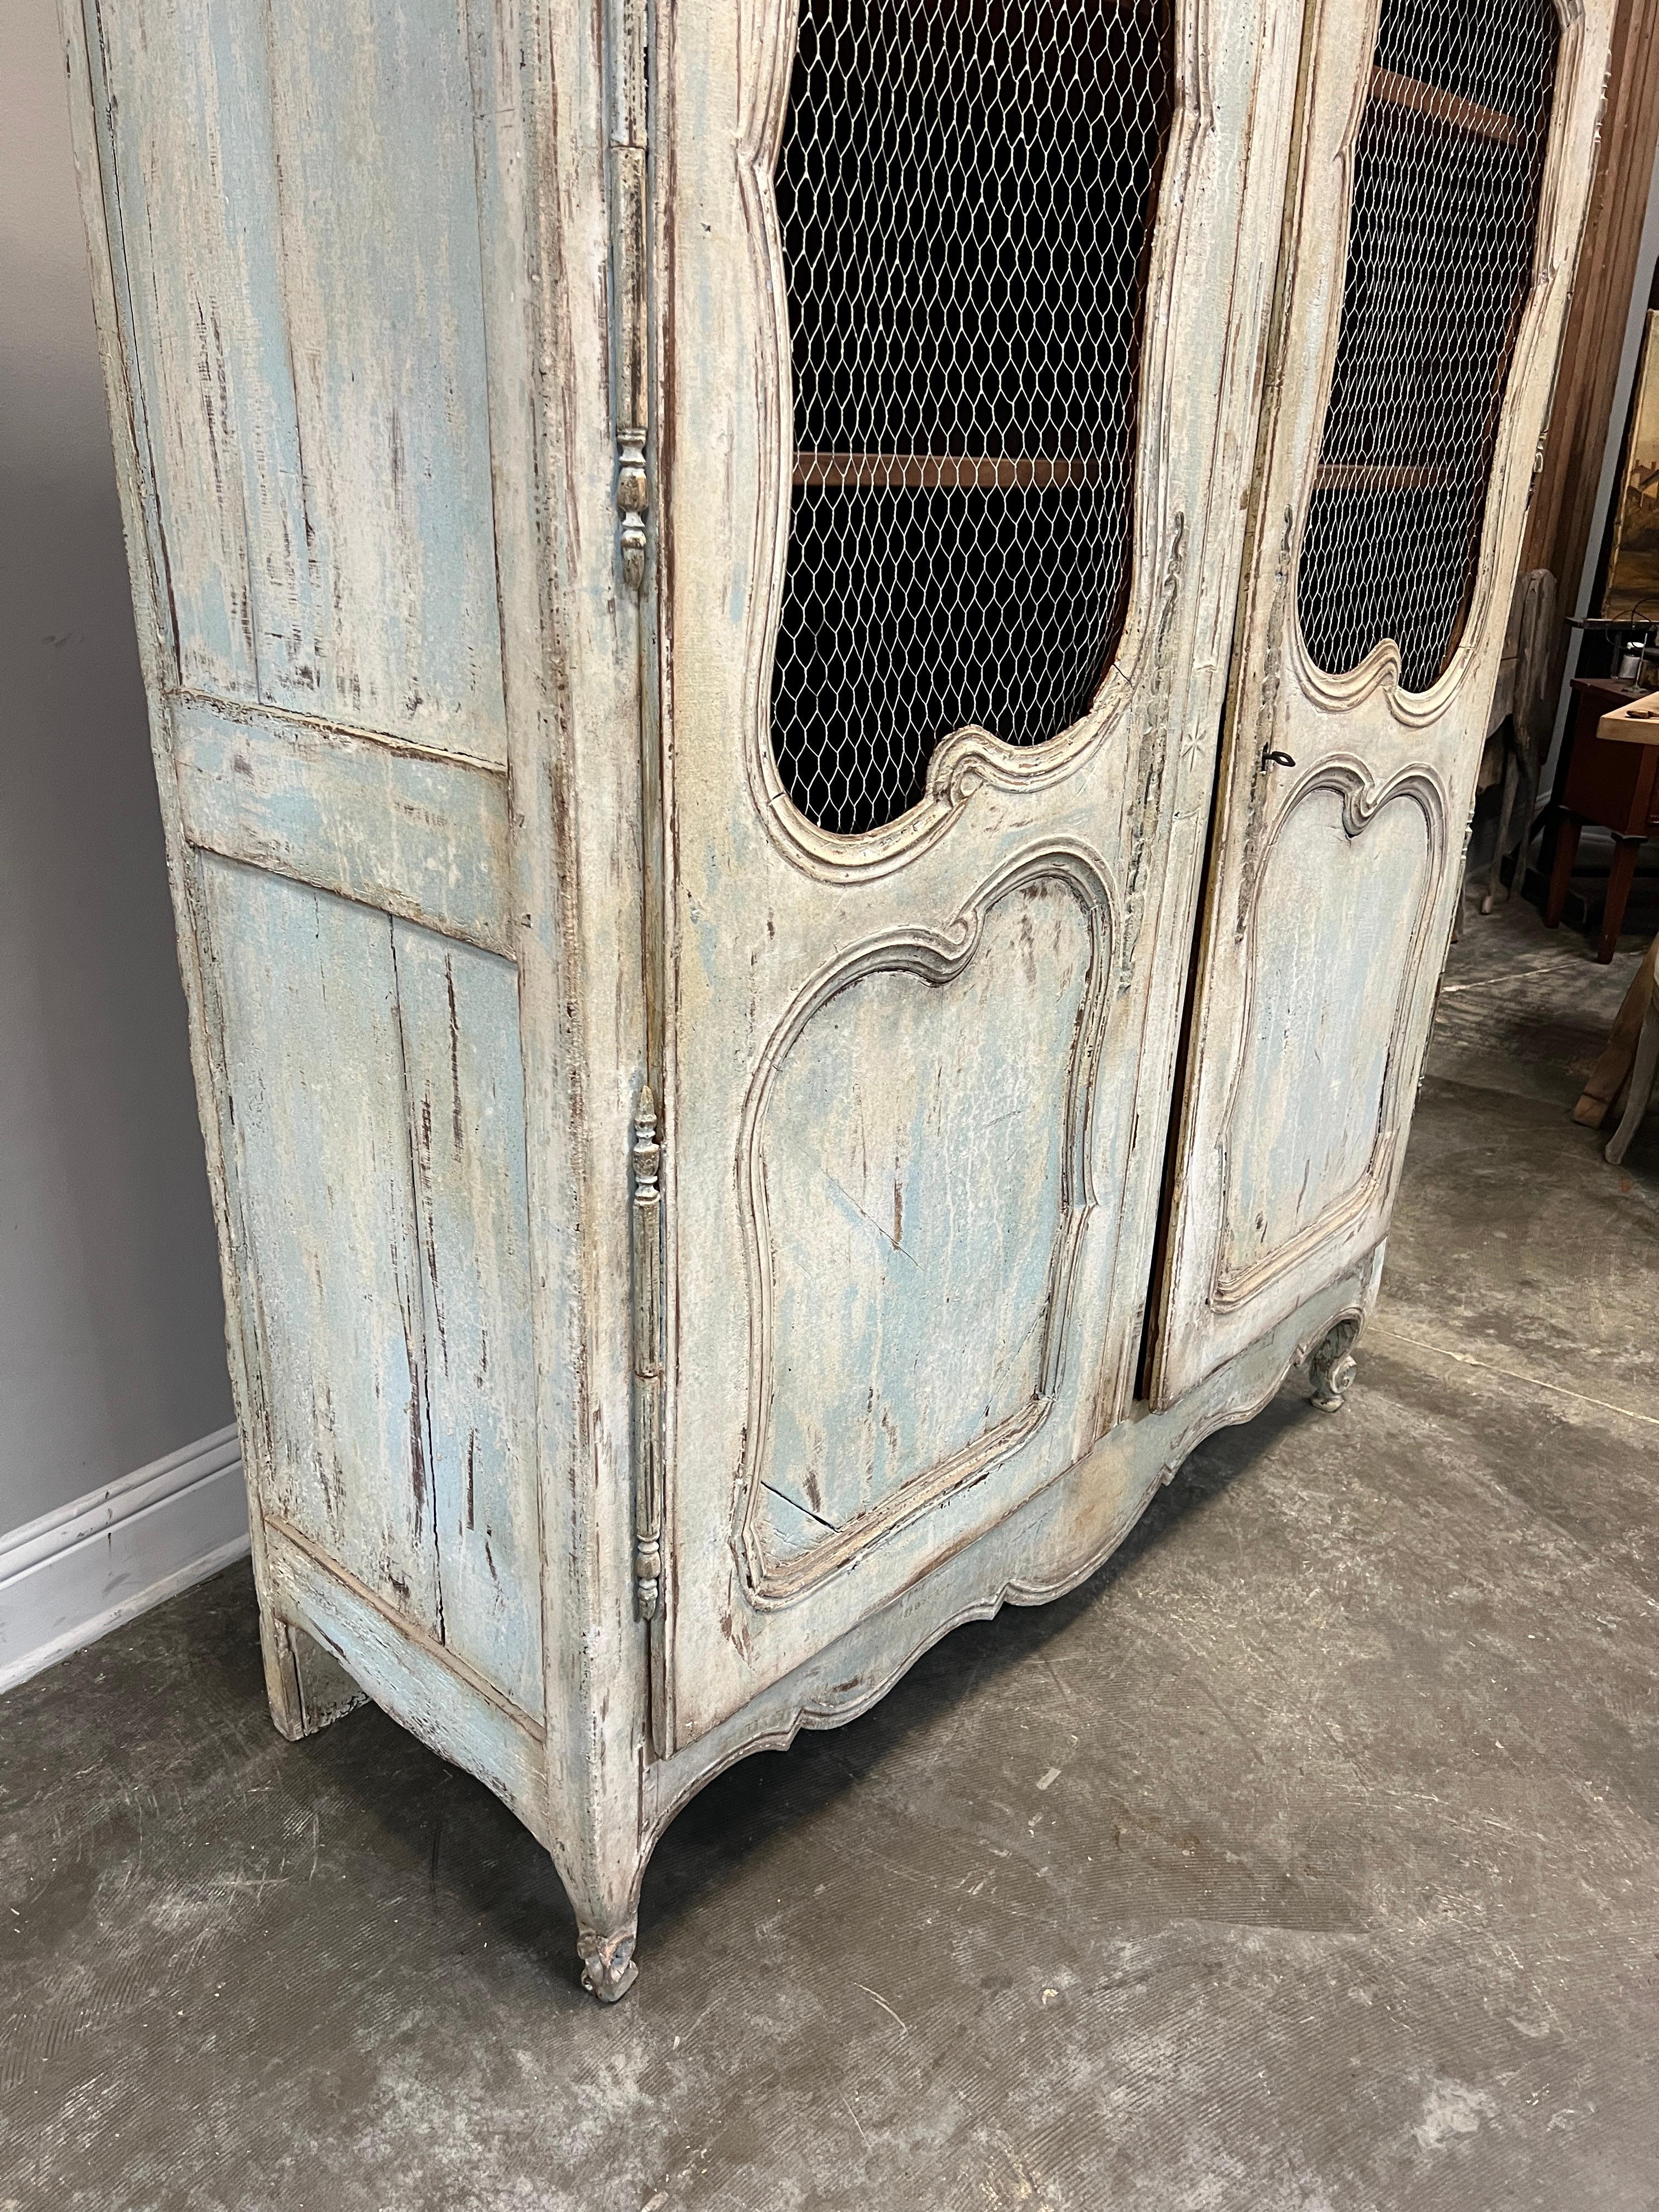 Charming Louis XV style painted armoire with chicken wire, great for display. Color is a cream and aqua color and hardware original.